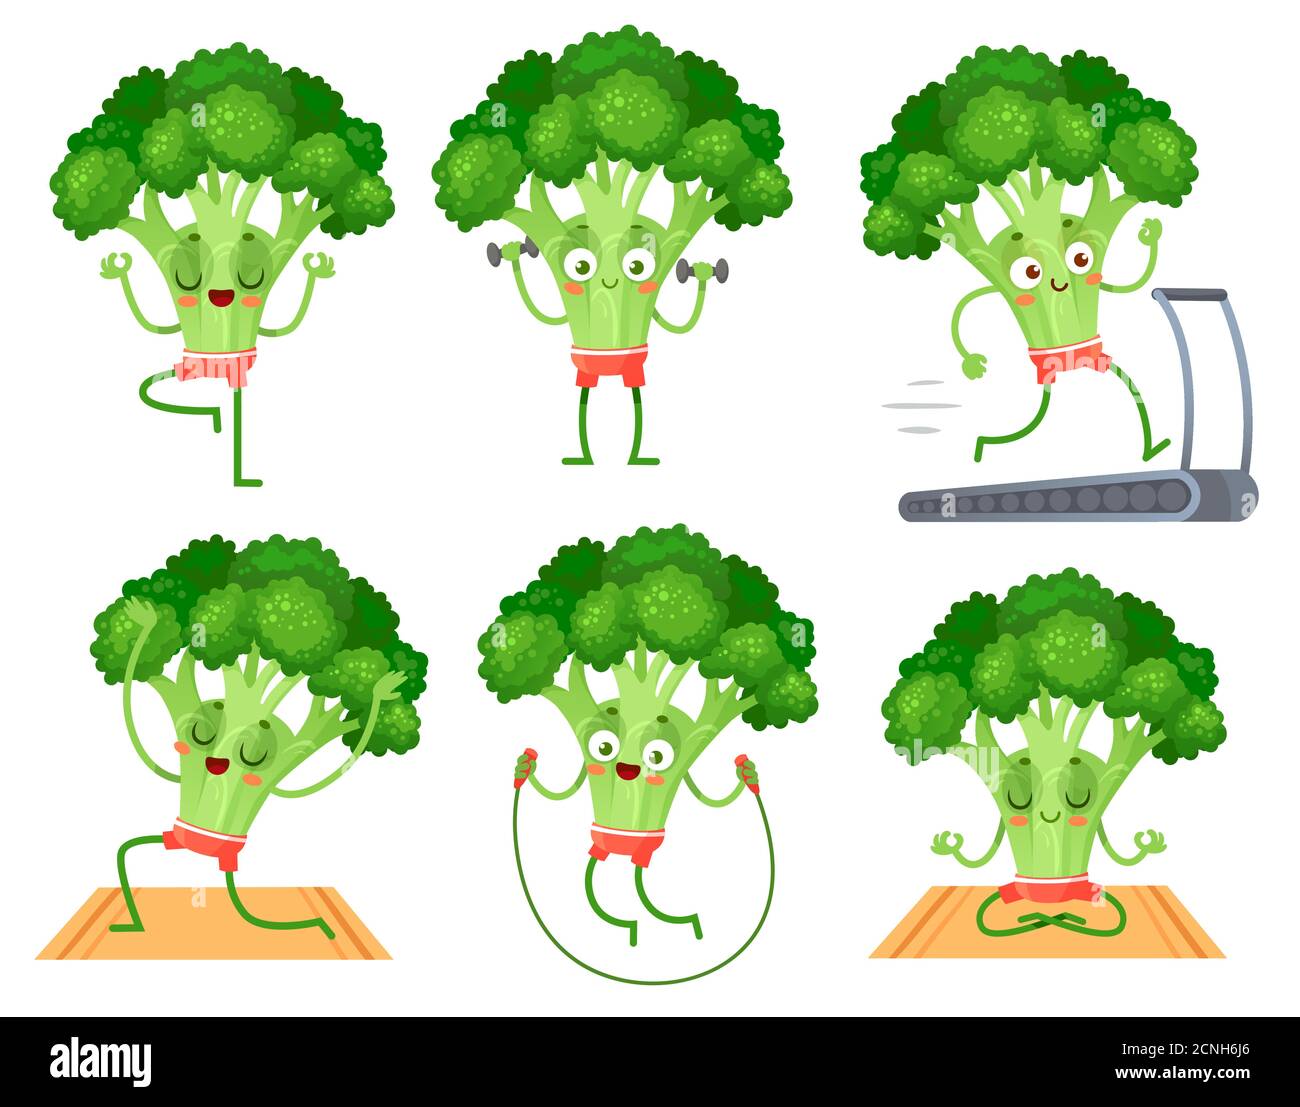 Cartoon broccoli character fitness. Vegetable doing exercises with dumbbells, running on treadmill and jumping Stock Vector